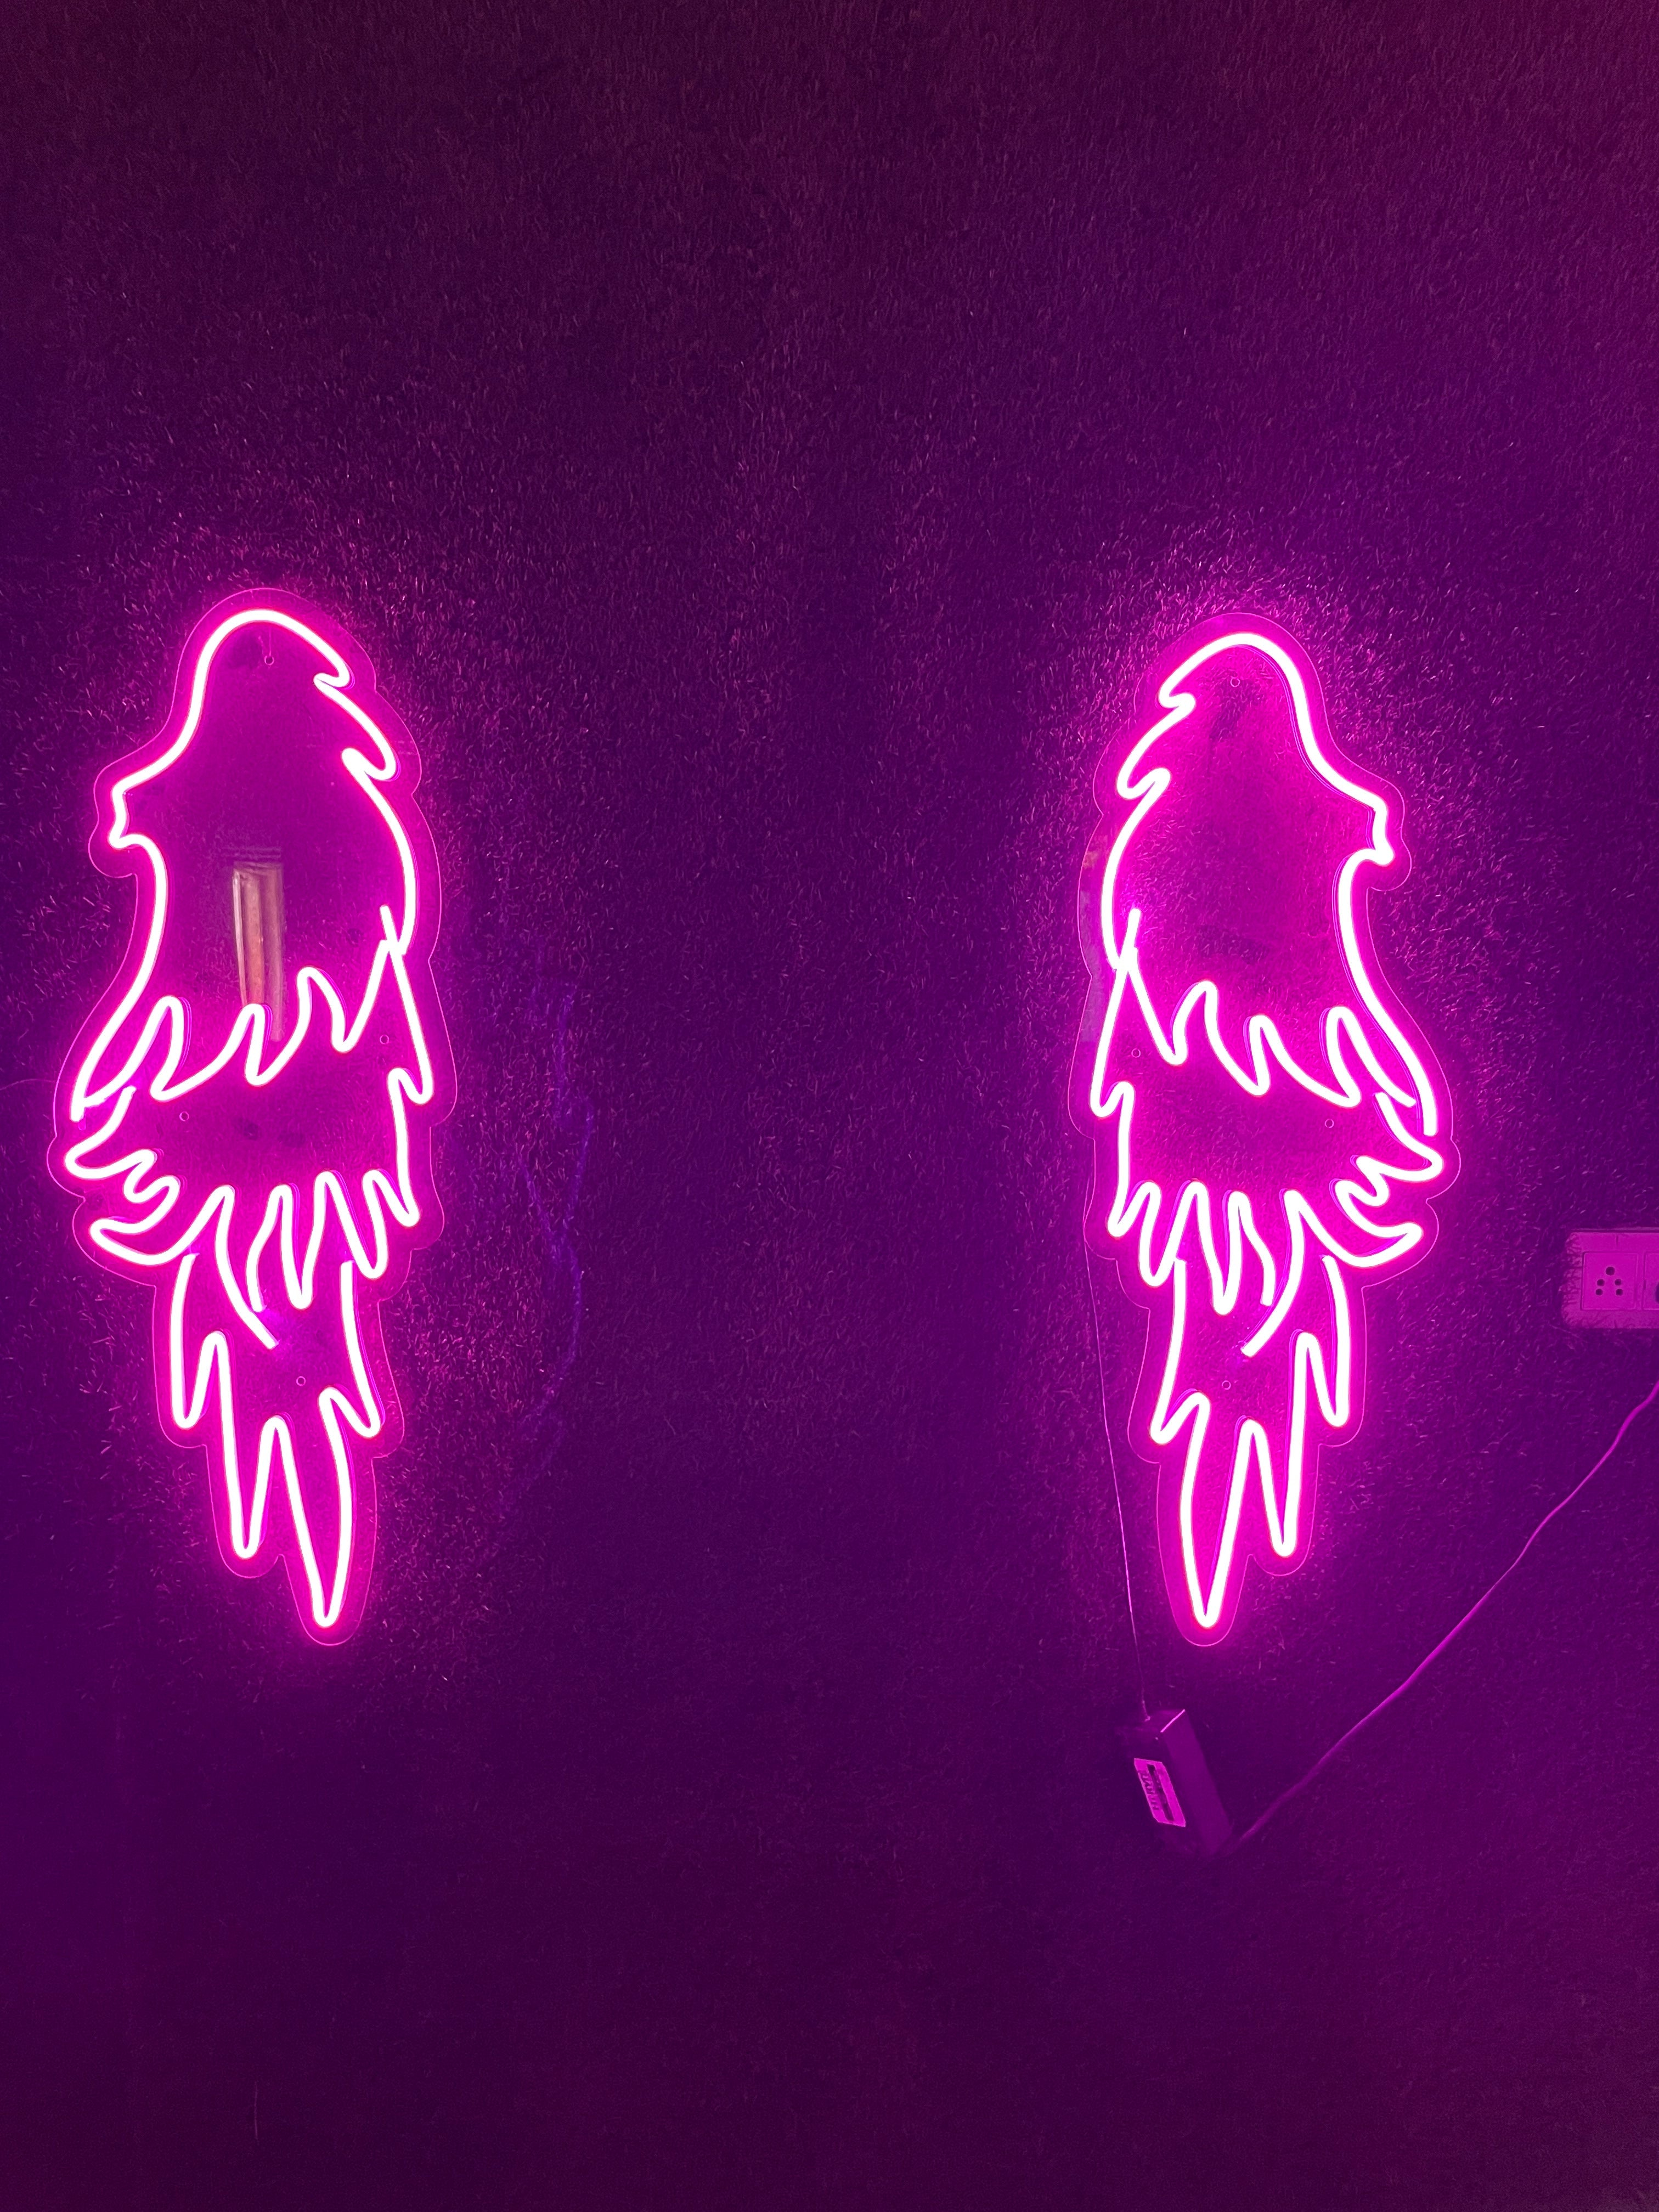 Angle wings - Neon Sign